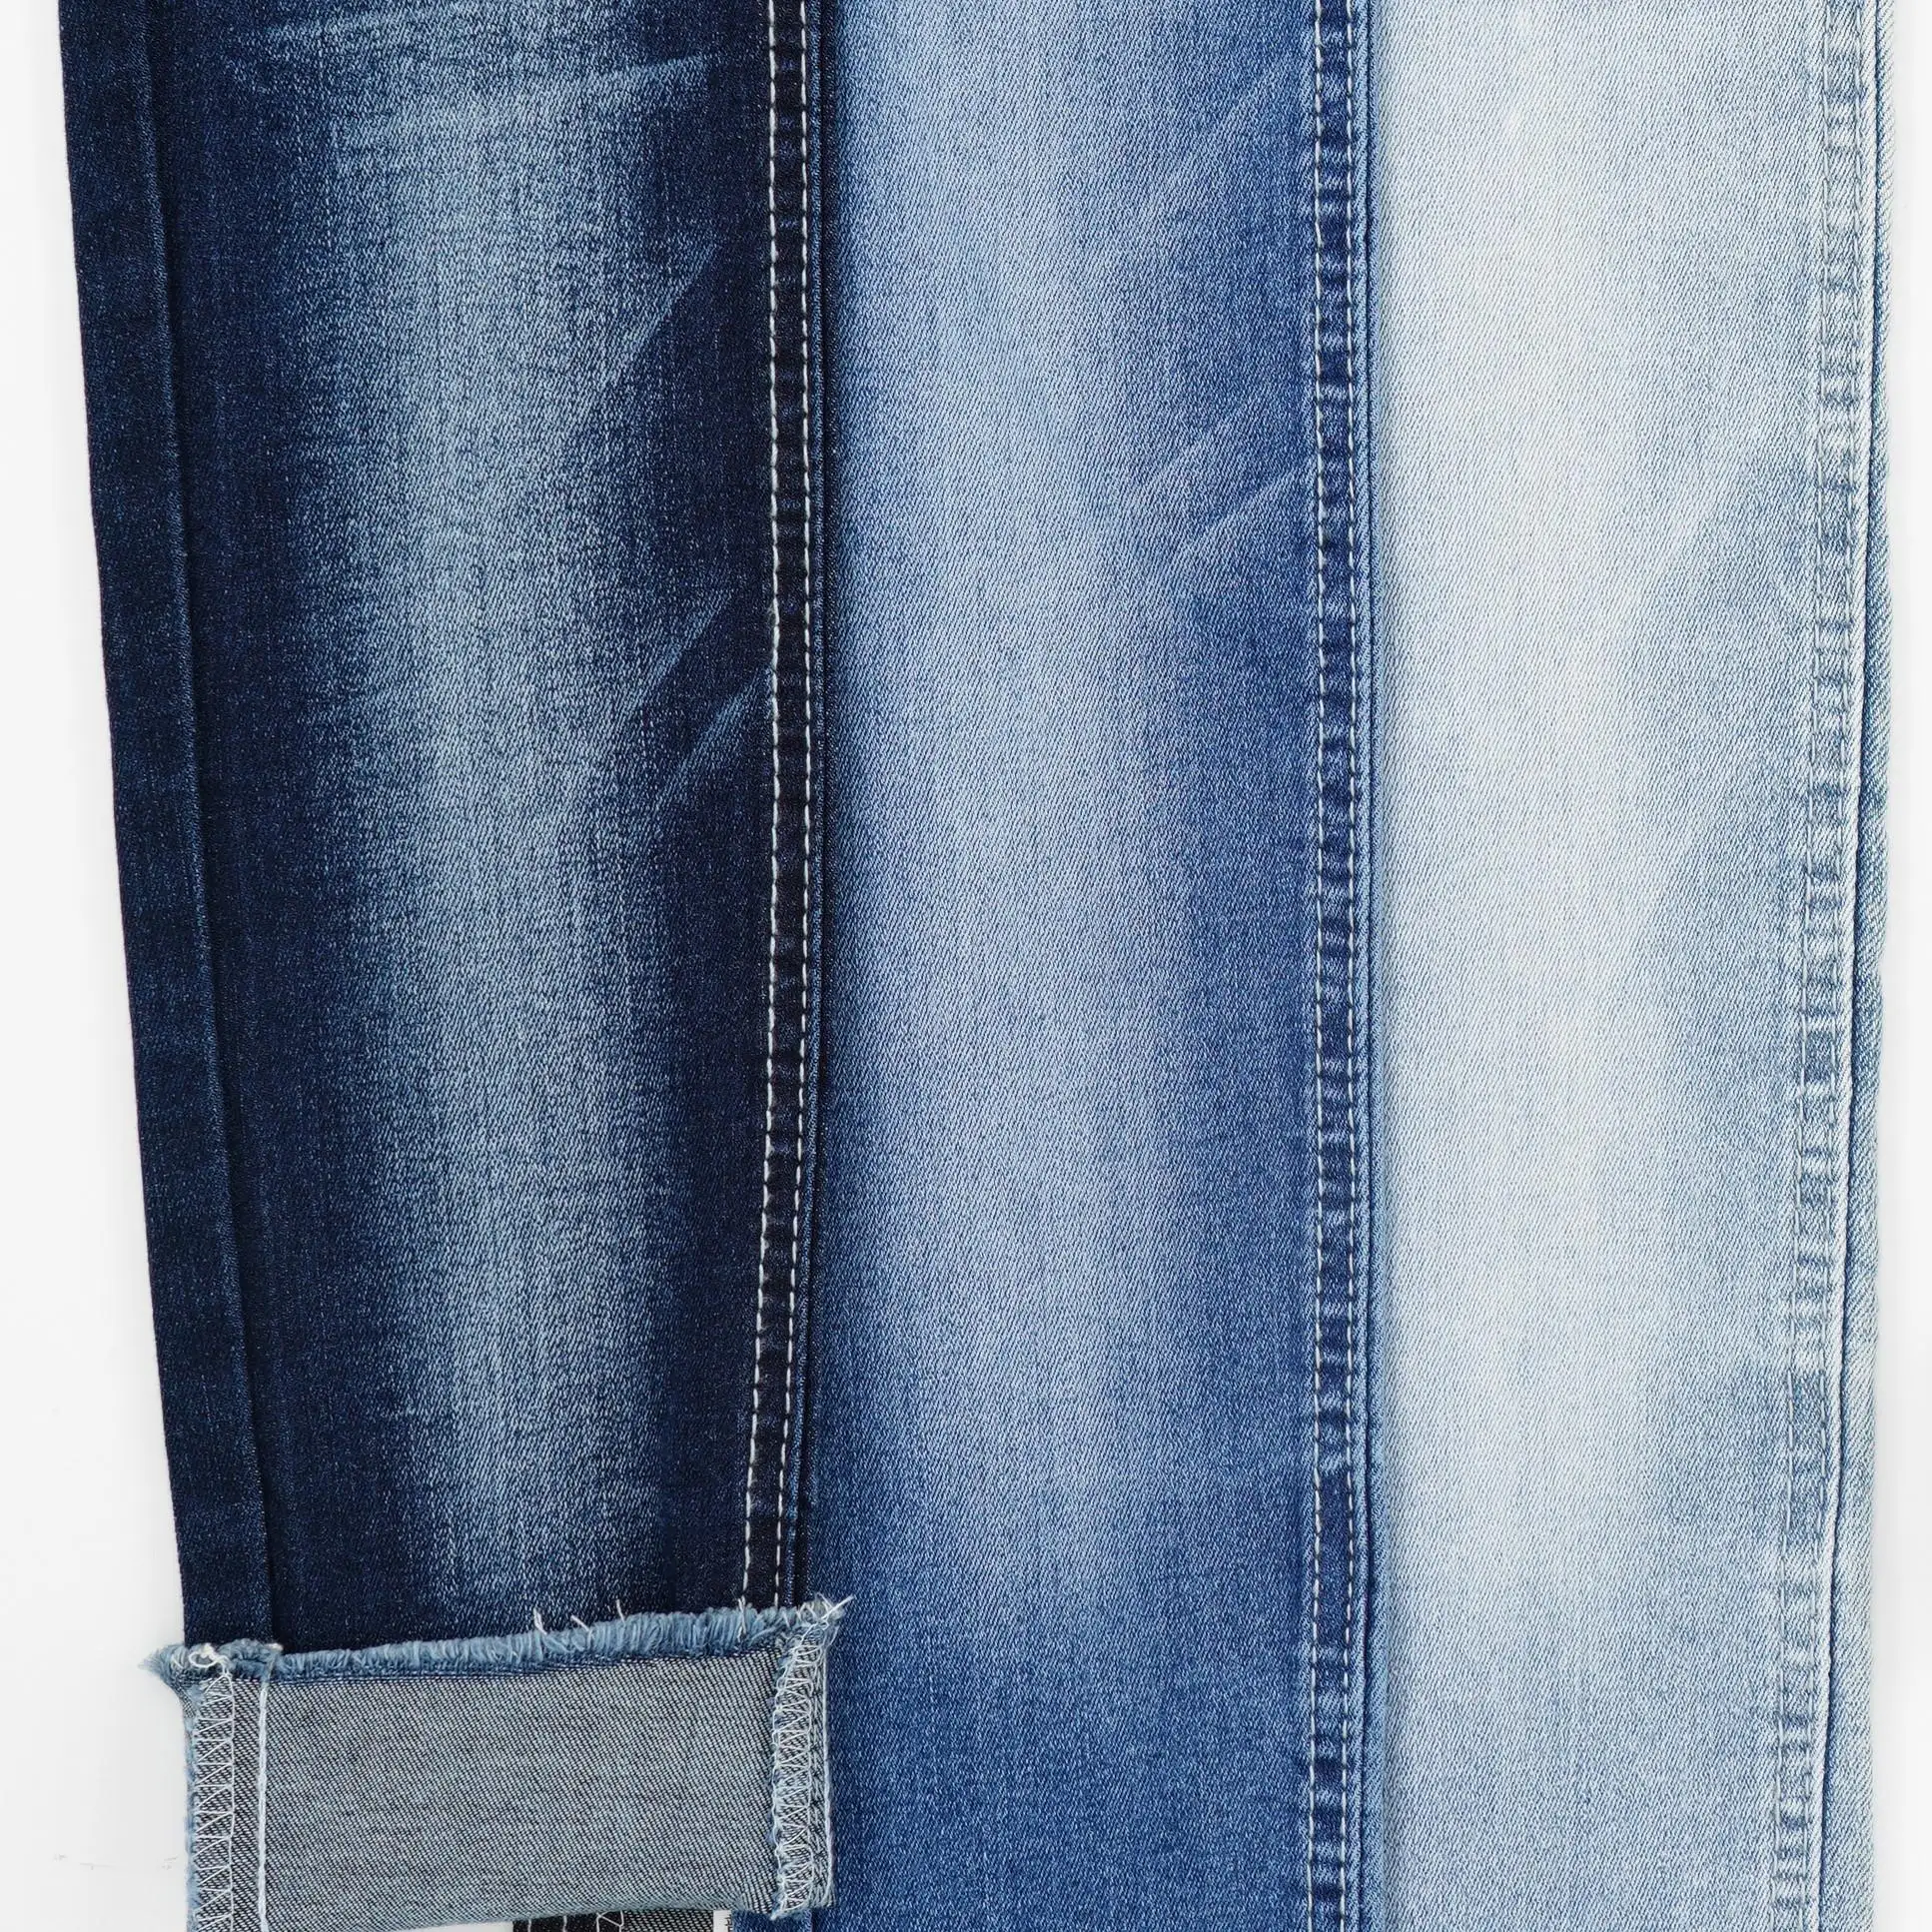 9.4oz S/S season jeans fabric collections Include high stretch & Stronger recovery fabric jeans wholesale washed denim fabric